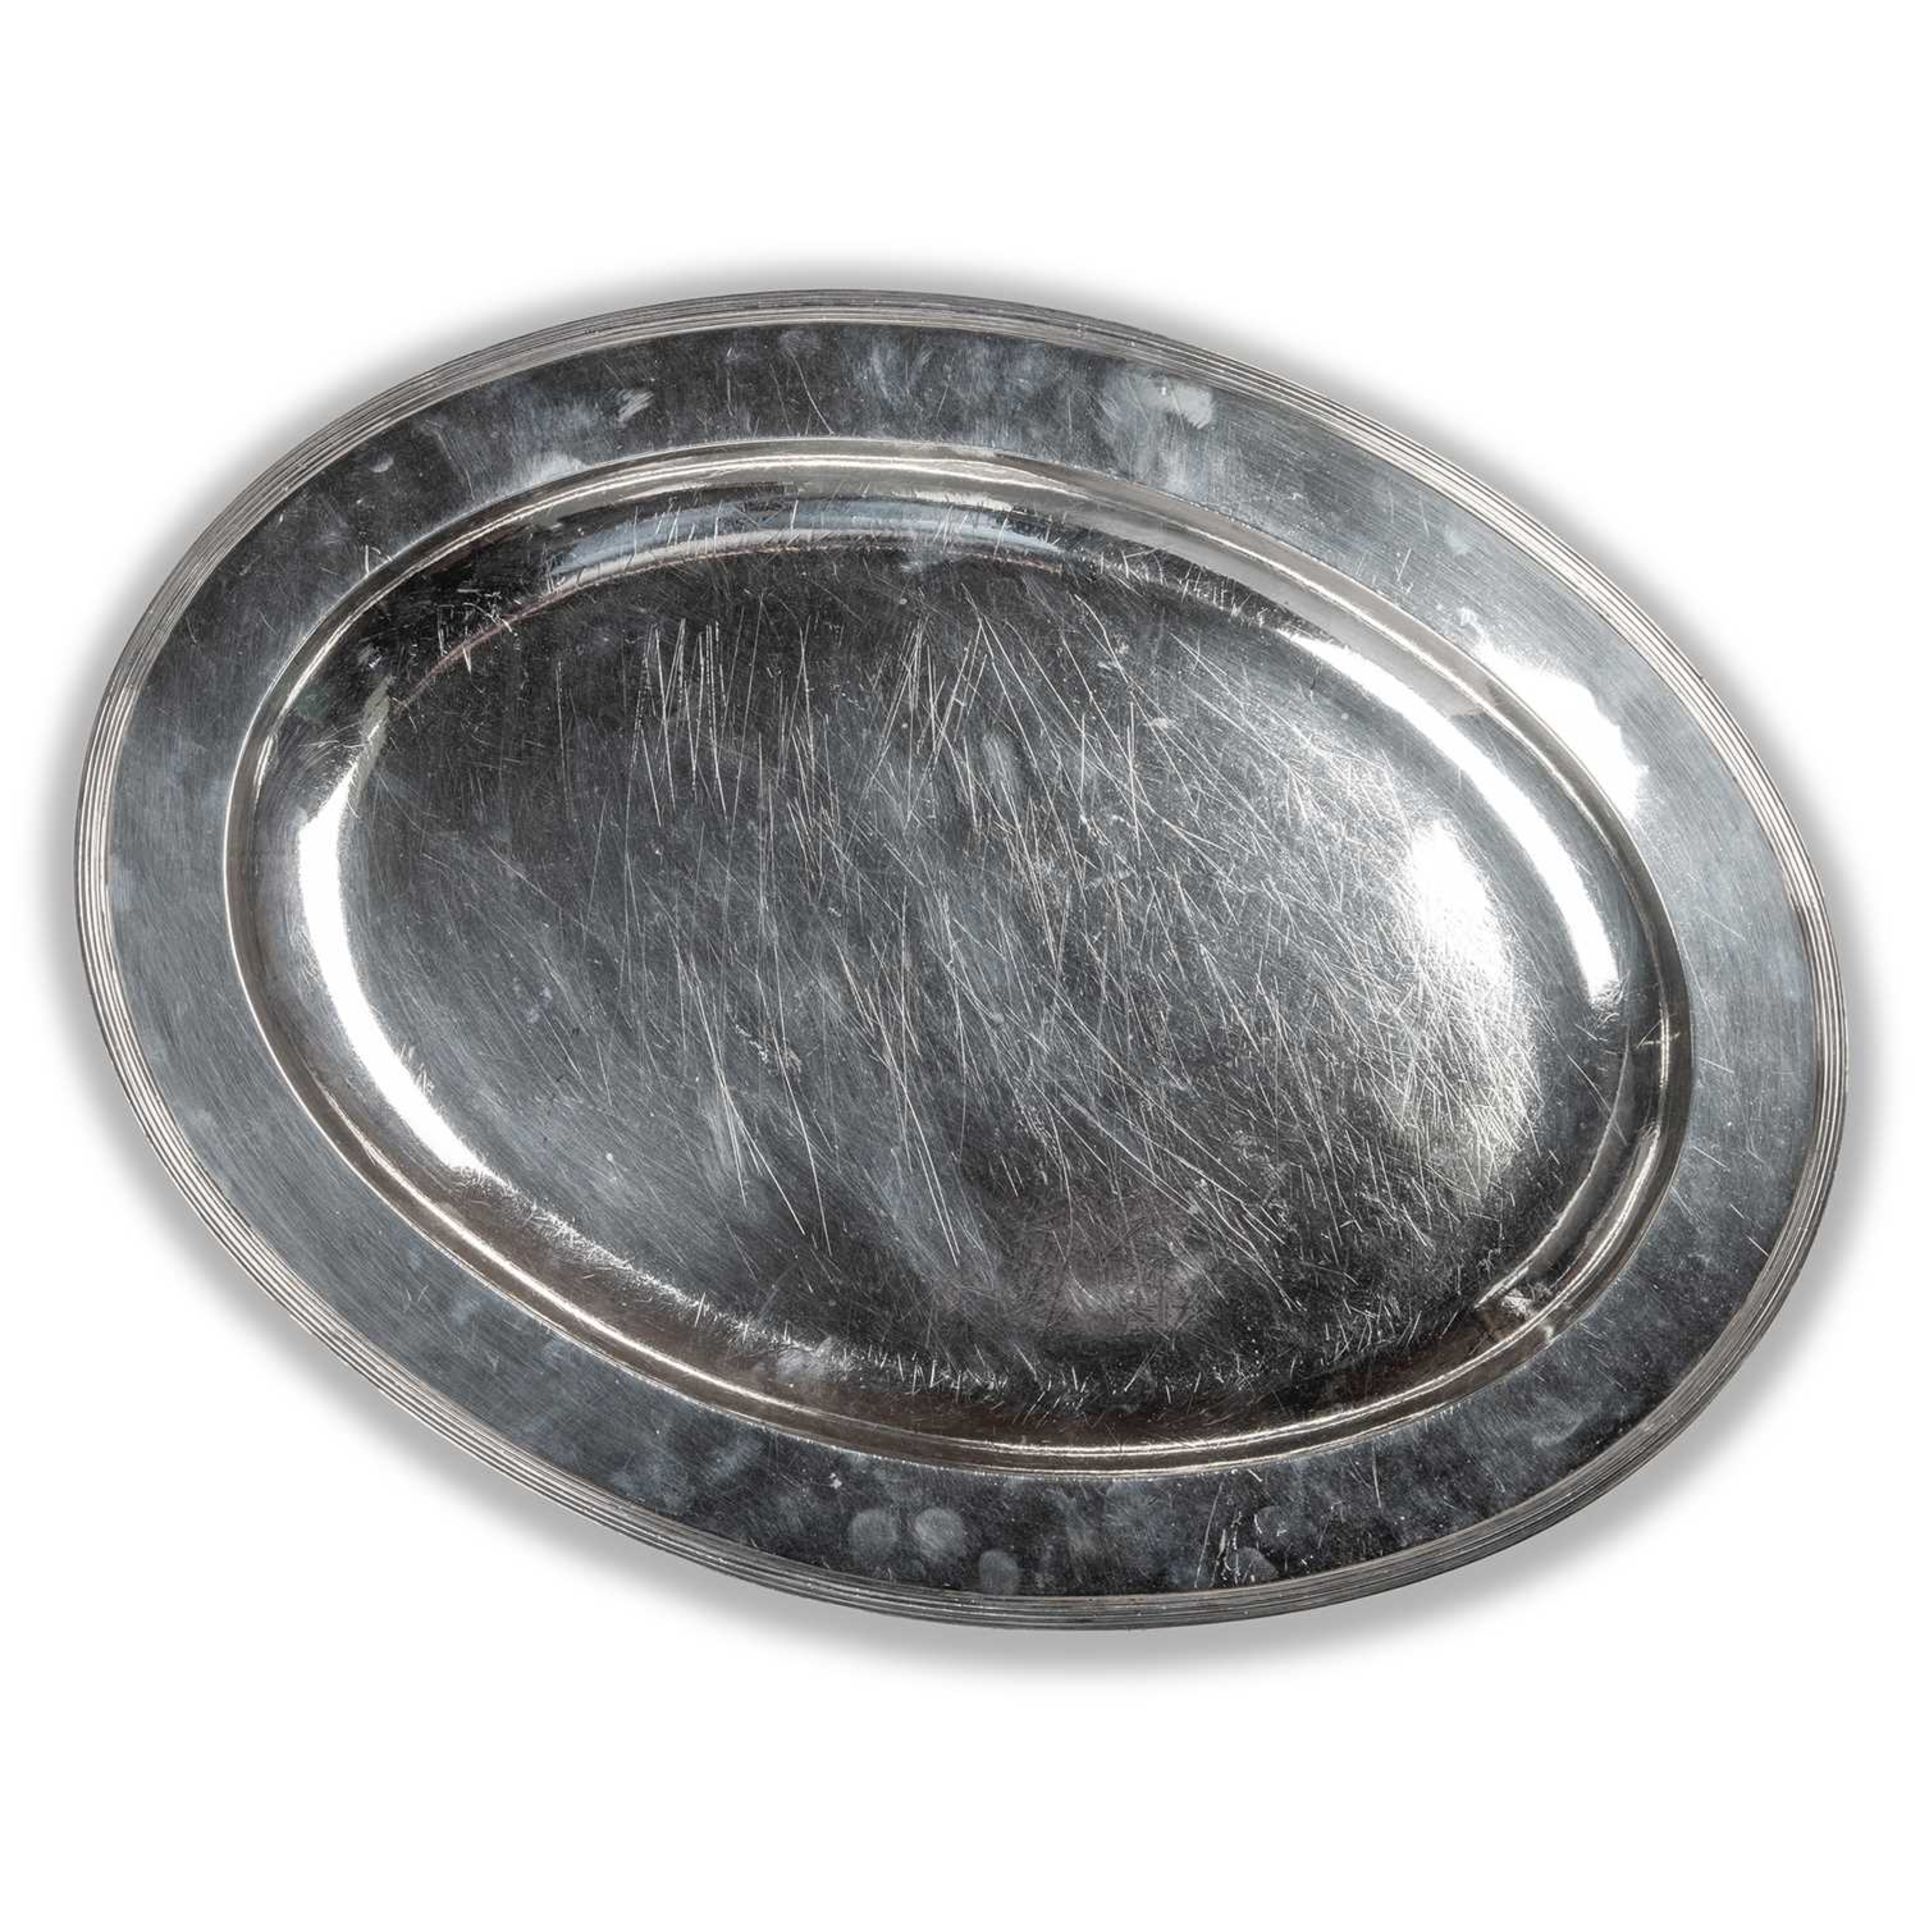 YORK TOWNMARK: A GEORGE III PROVINCIAL SILVER MEAT DISH - Image 2 of 3